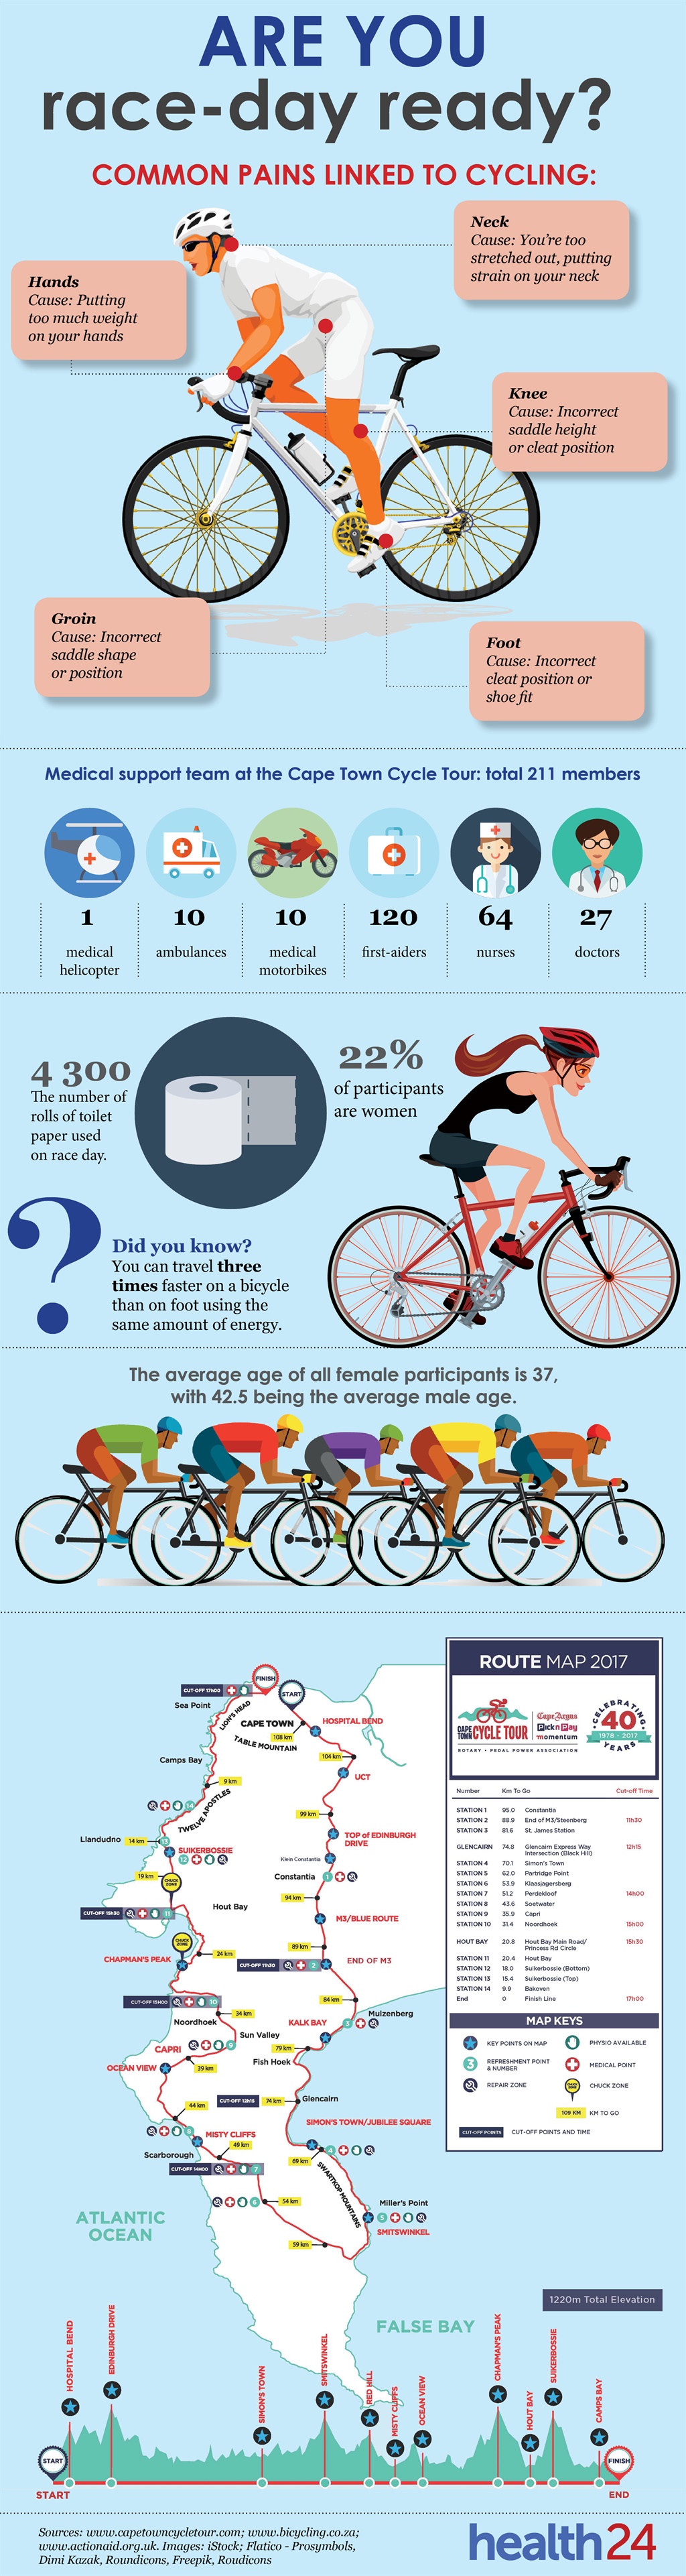 cycling, Cape Town Cycle Tour, infographic, bicycl